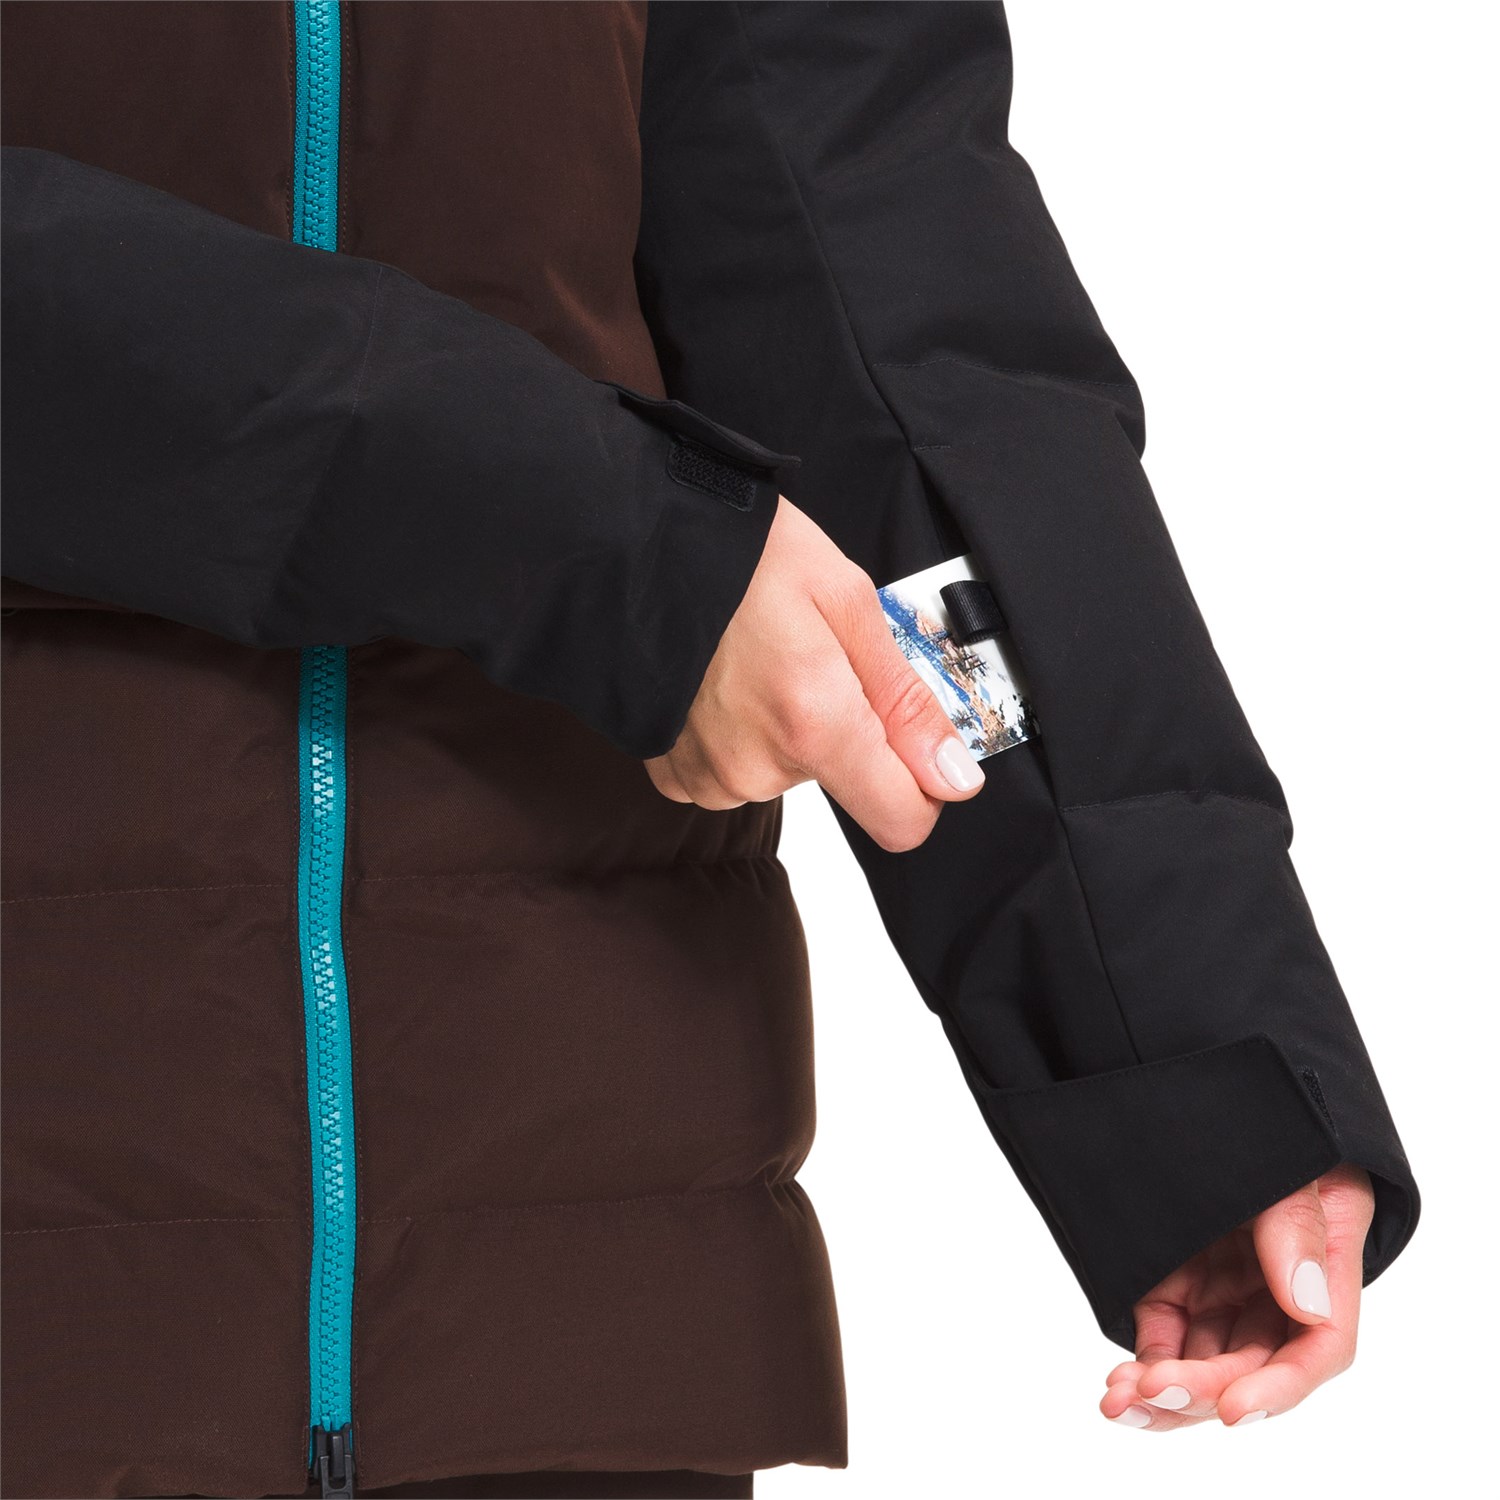 The North Face Pallie Down Jacket - | evo